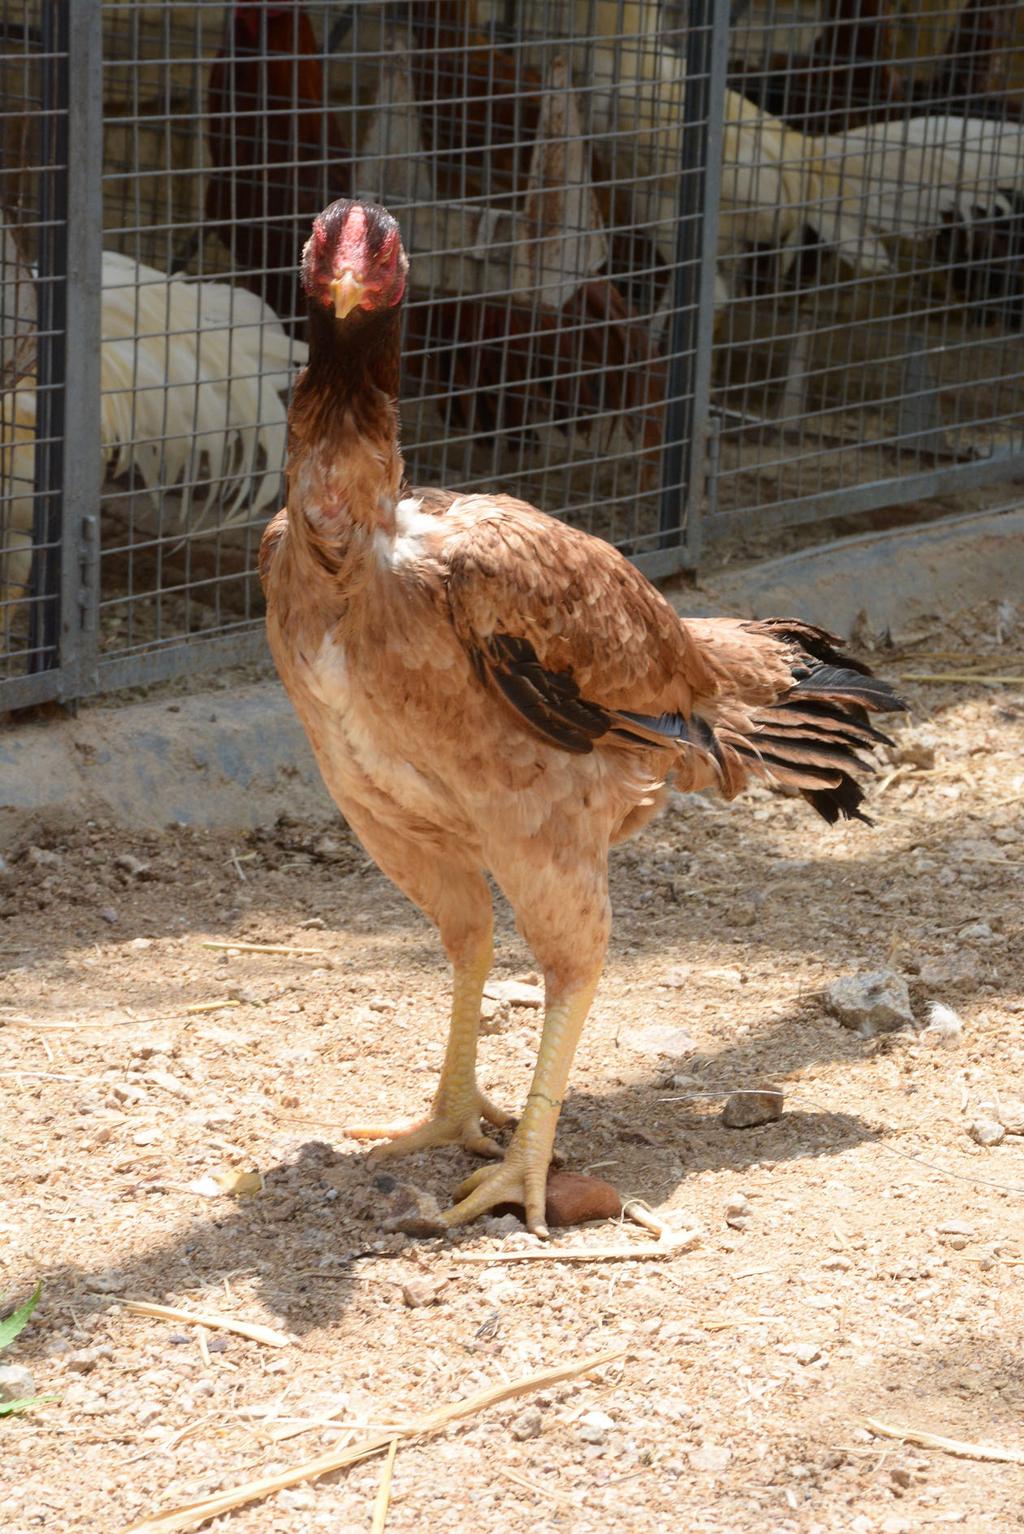 The Aseel chickens were bred for game purpose over the years, evolving the features like compact and firm body structure, strong appendages (spur and toe), firmly attached pea combs, strong legs, etc.